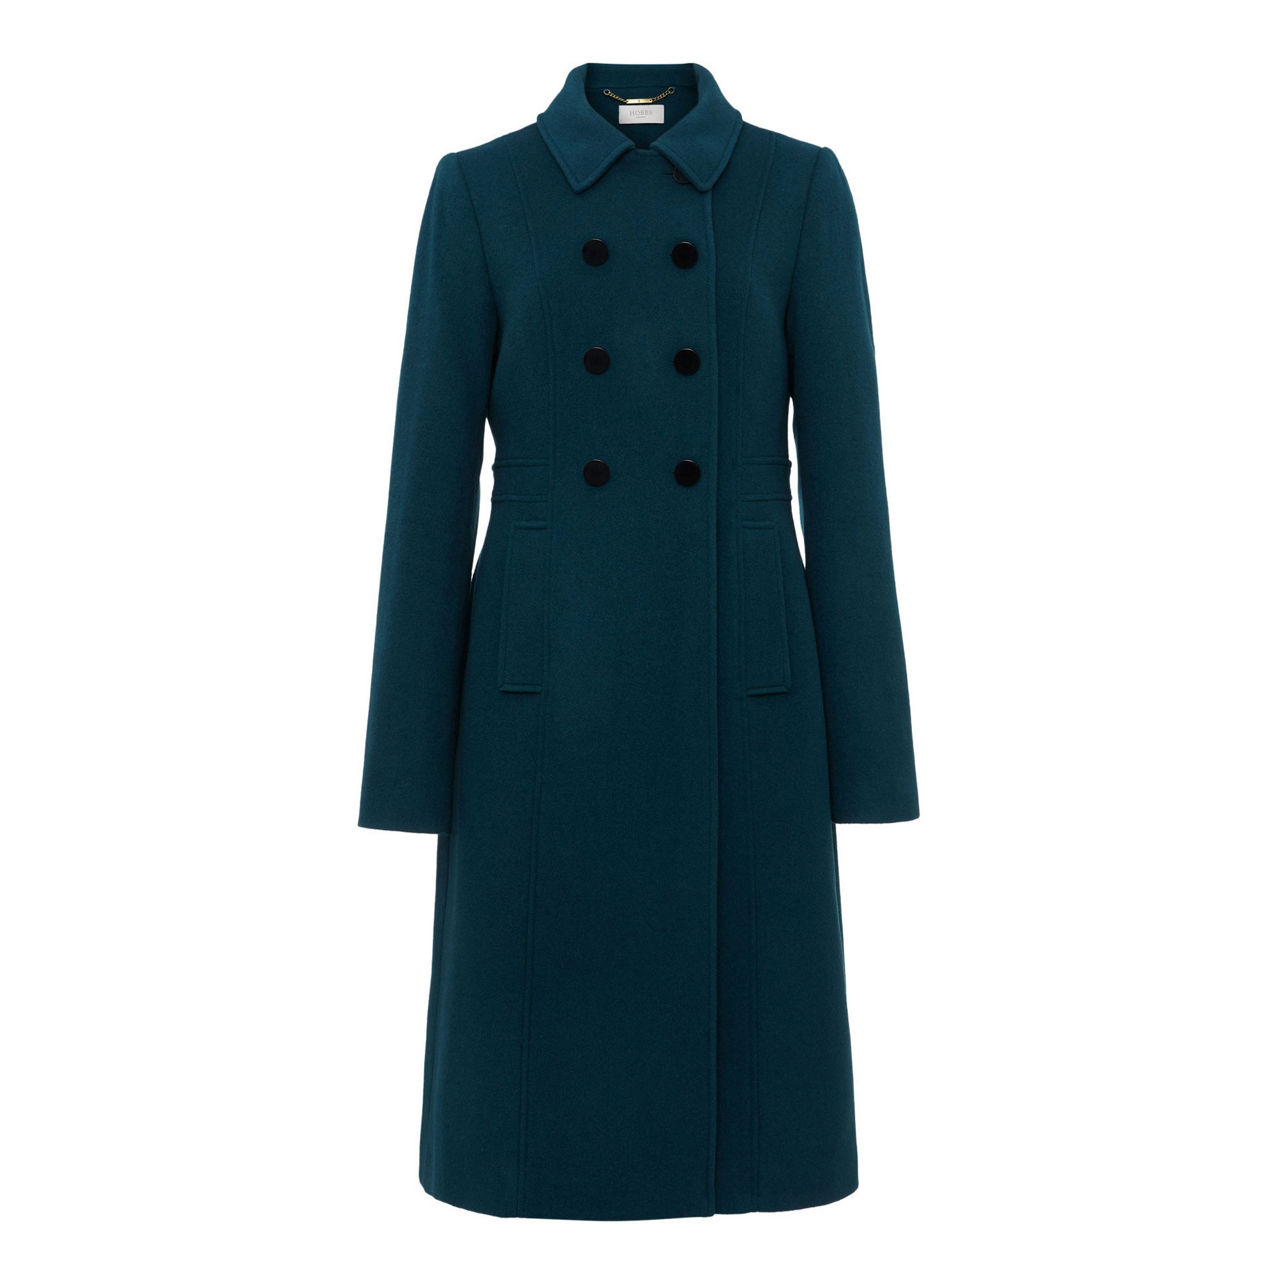 Wool Blend Collared Tailored Coat, Phase Eight